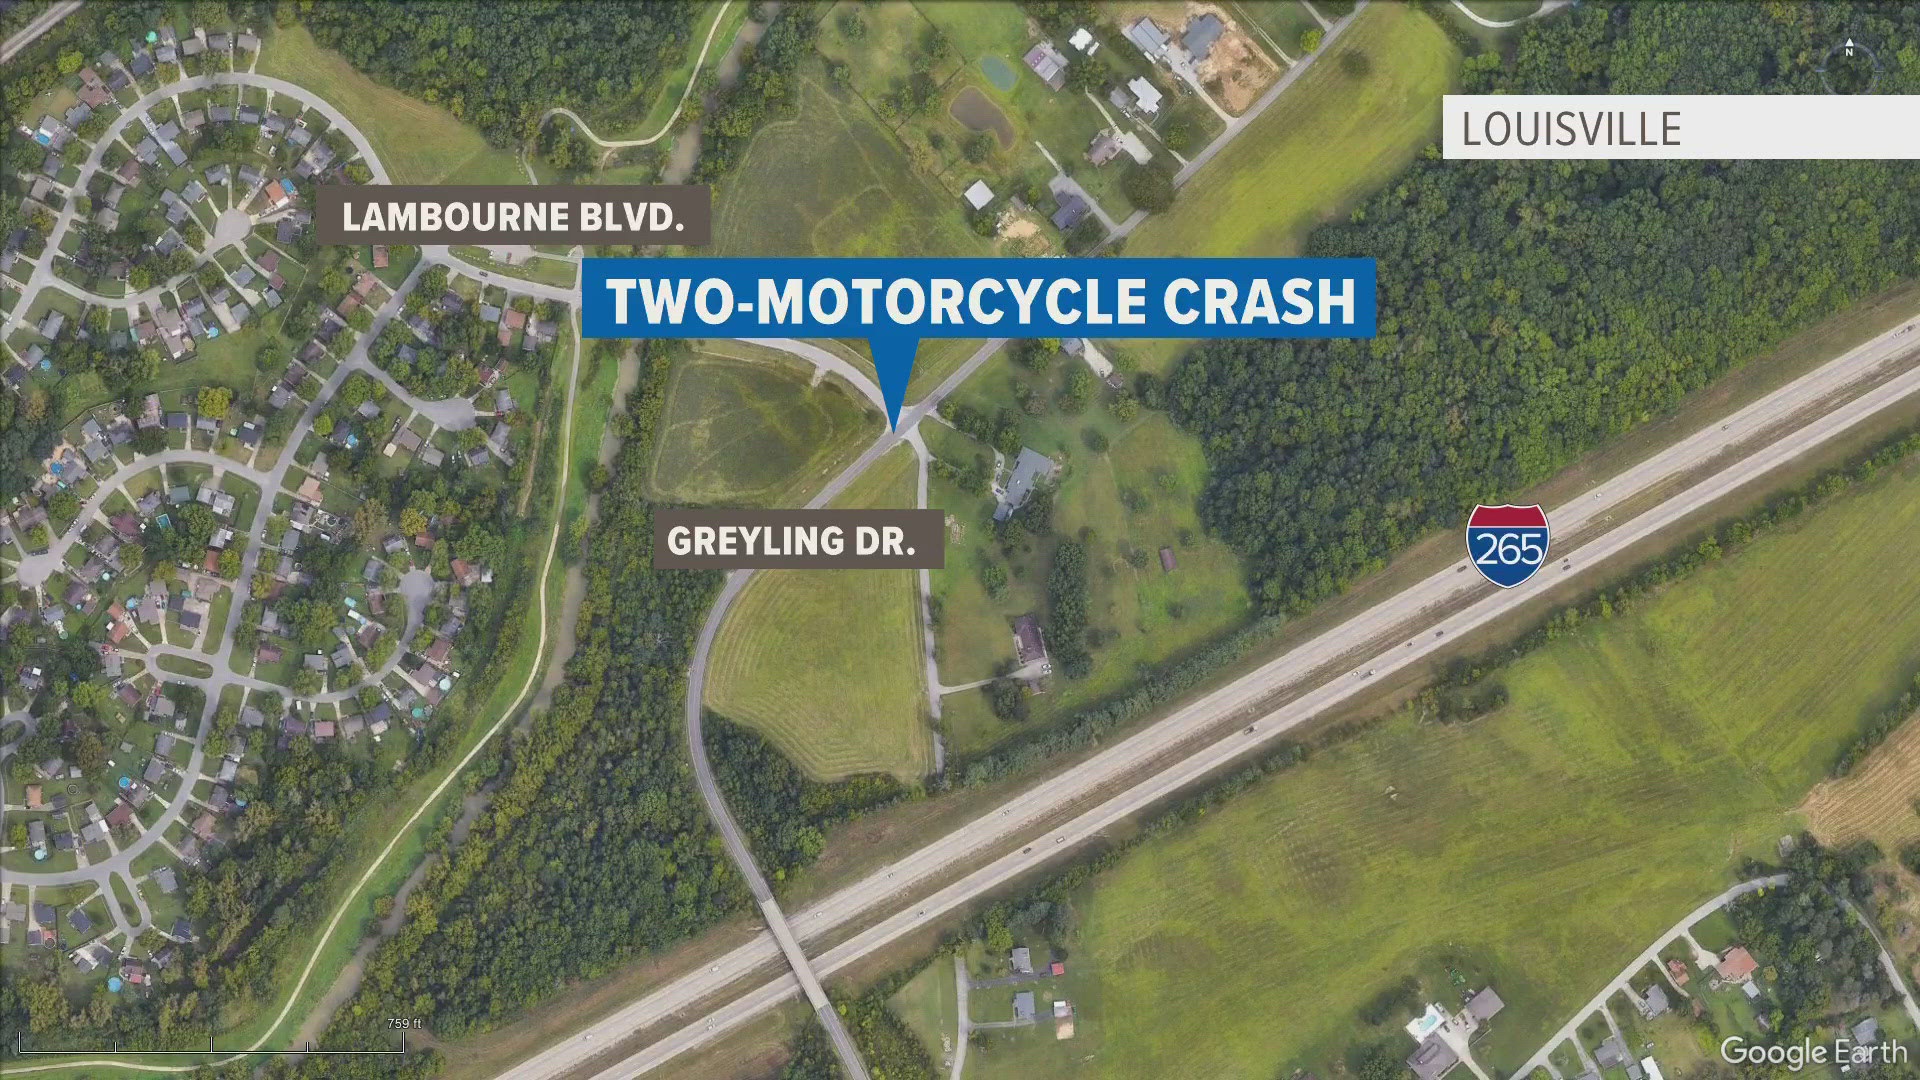 Another motorcyclist was also seriously injured in the crash.